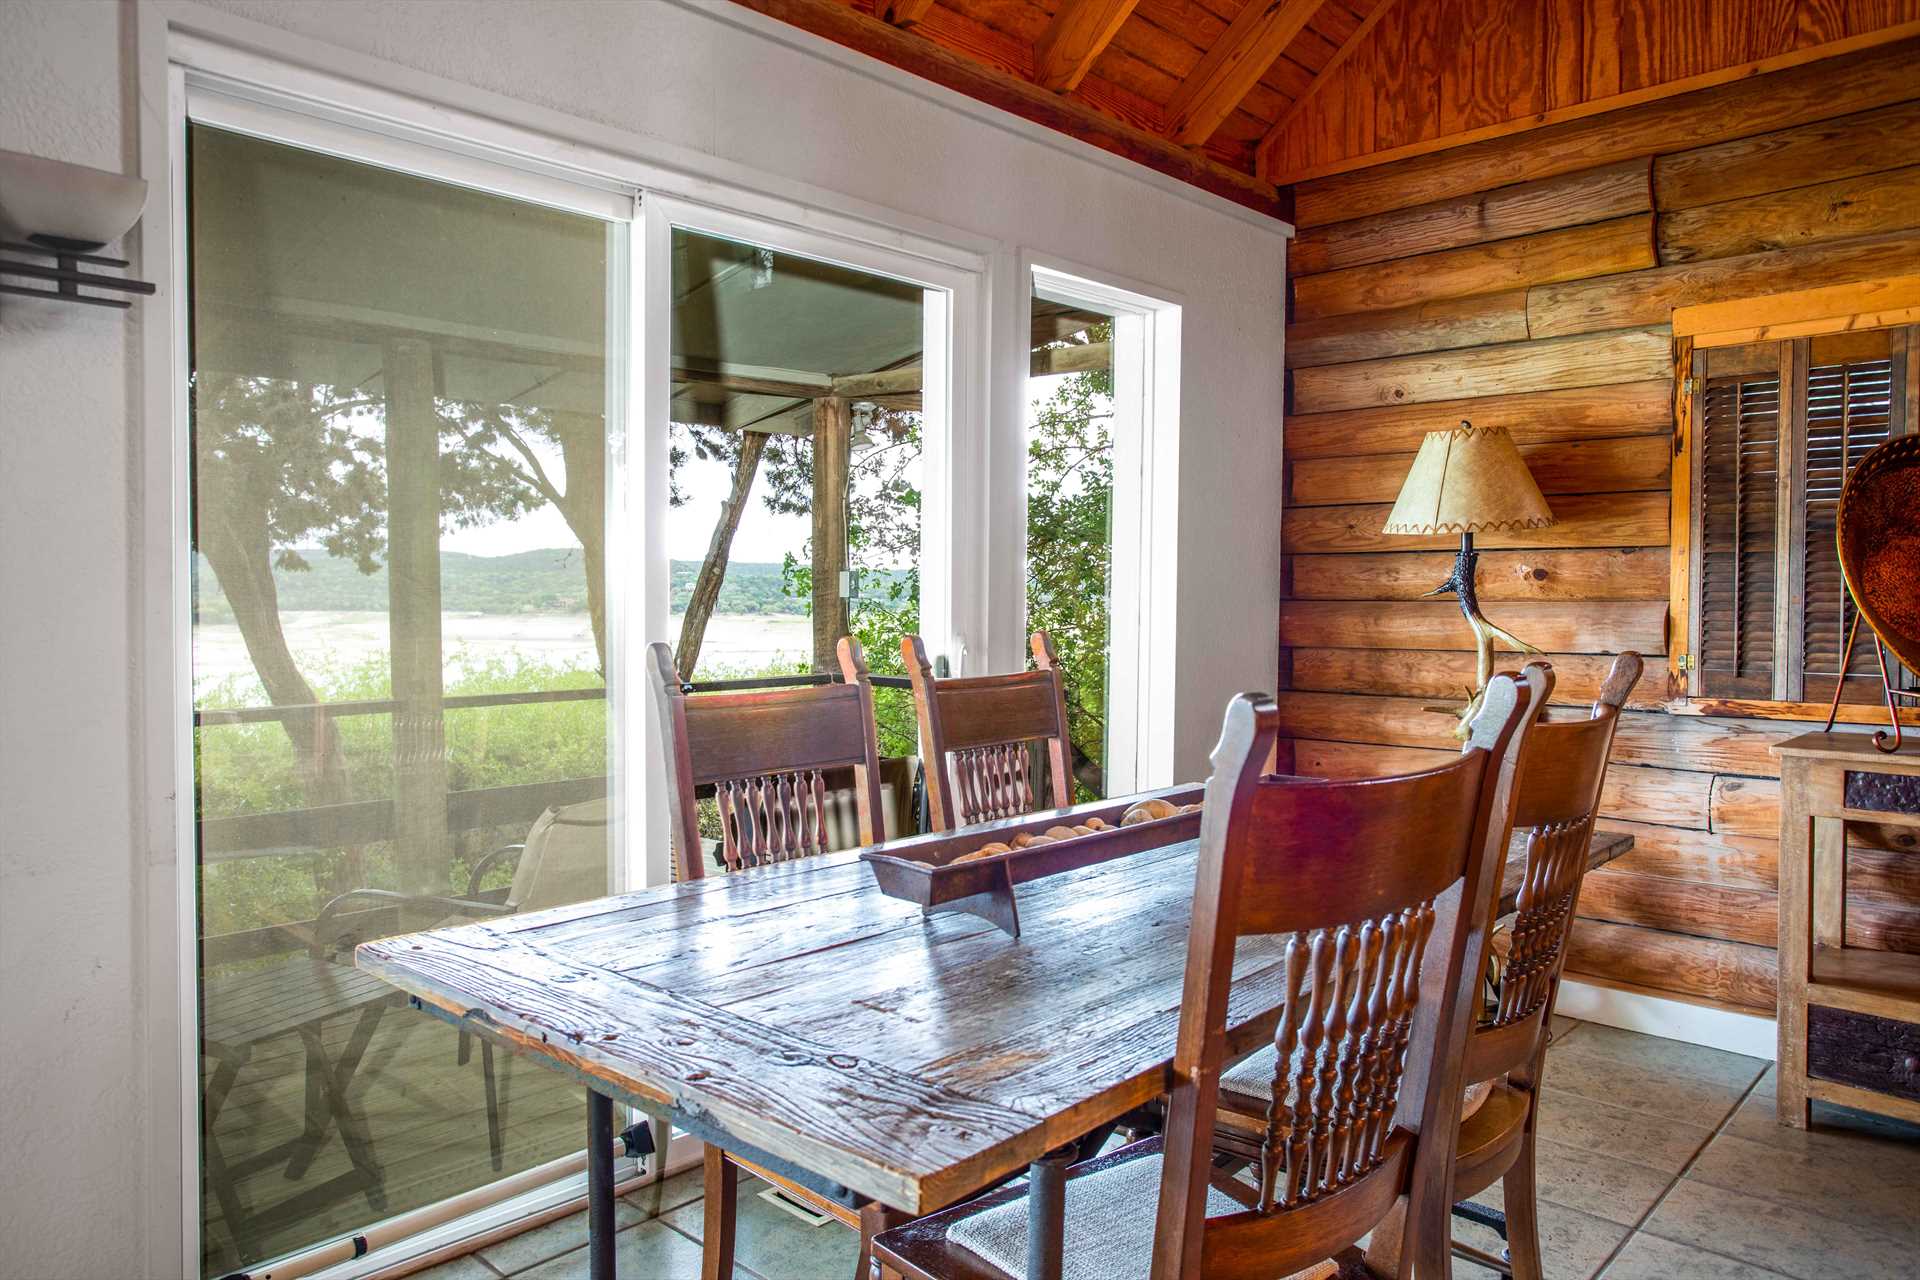                                                 Plenty of windows facing the back deck give you access to inspiring lake views from inside, too!